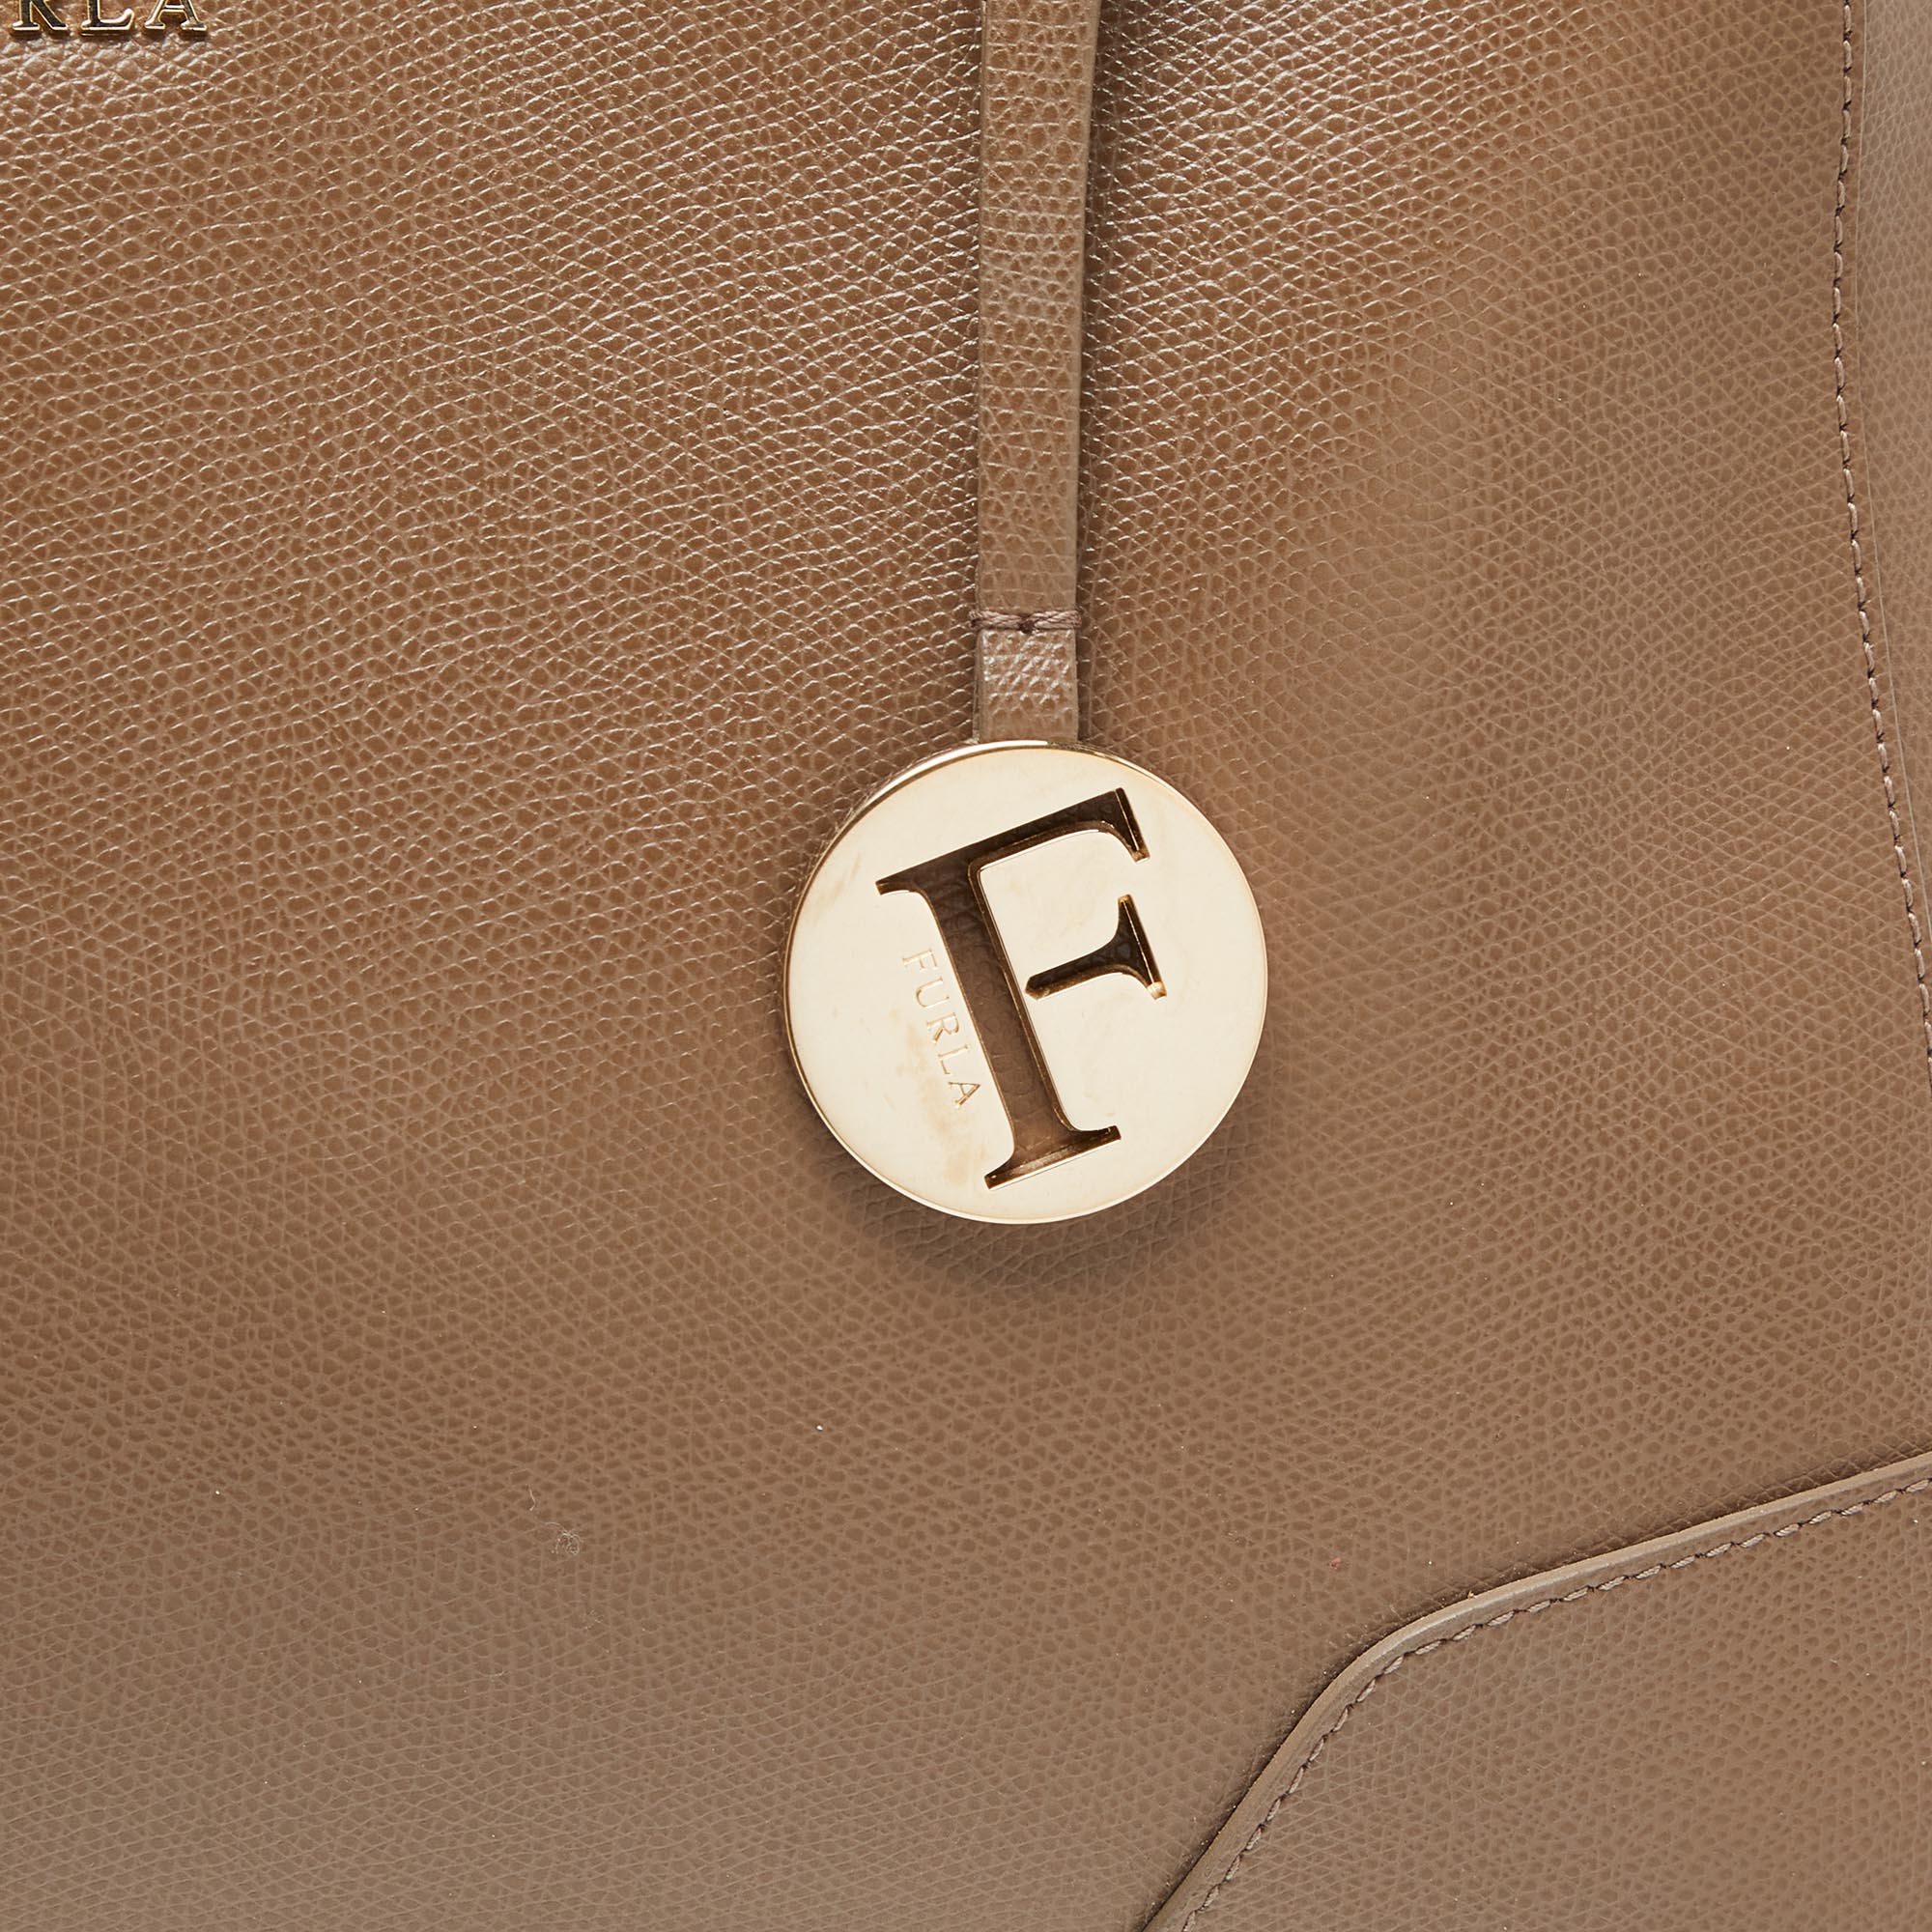 Furla Brown Leather Dolly Satchel